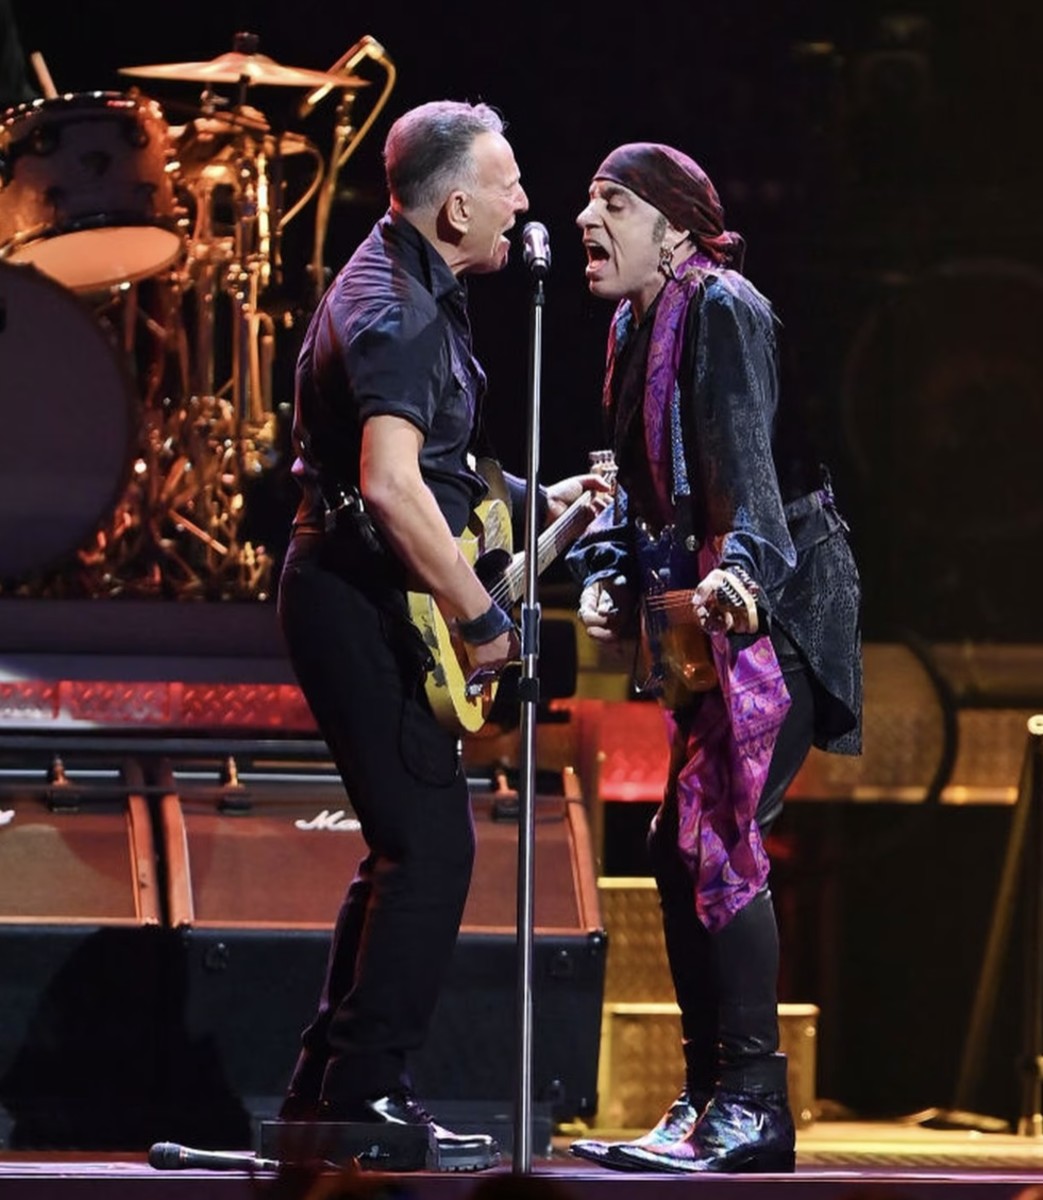 Bruce Springsteen and Steven Van Zandt rock out during a concert in Orlando, Fla. on Sunday.